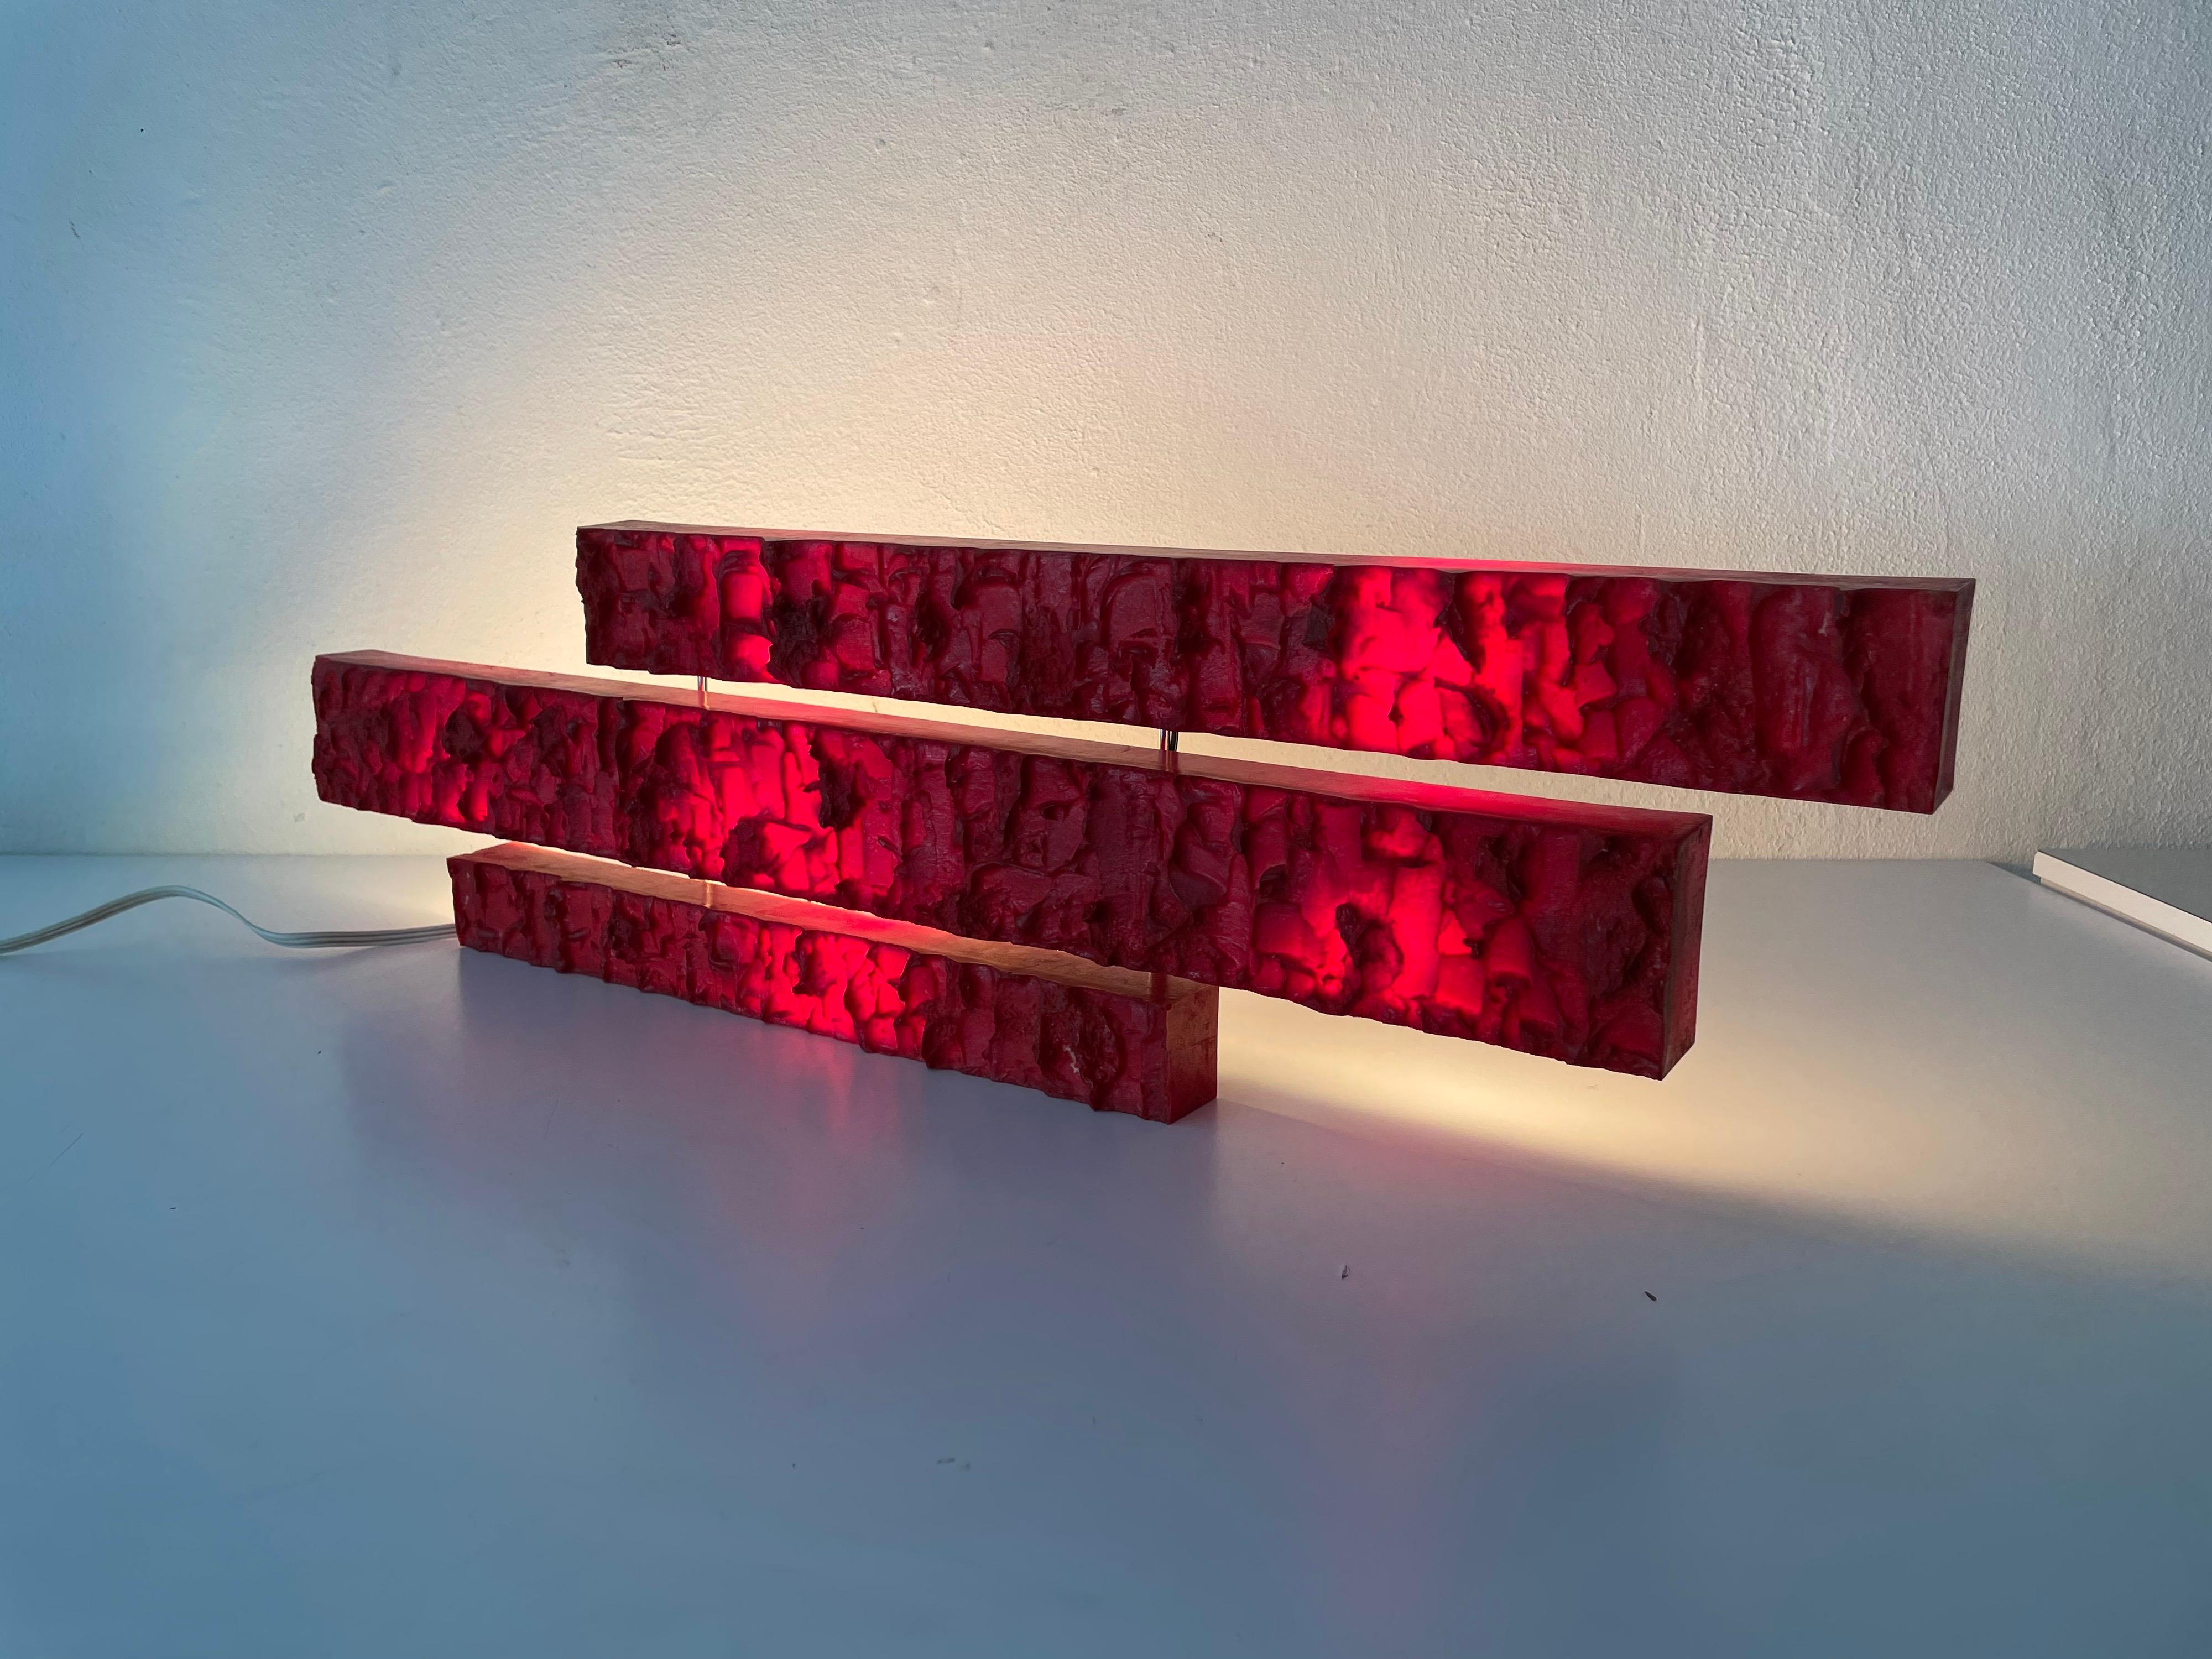 Textured Red Plastic Large Wall Lamp by Uwe Mersch Design, 1970s Germany For Sale 6